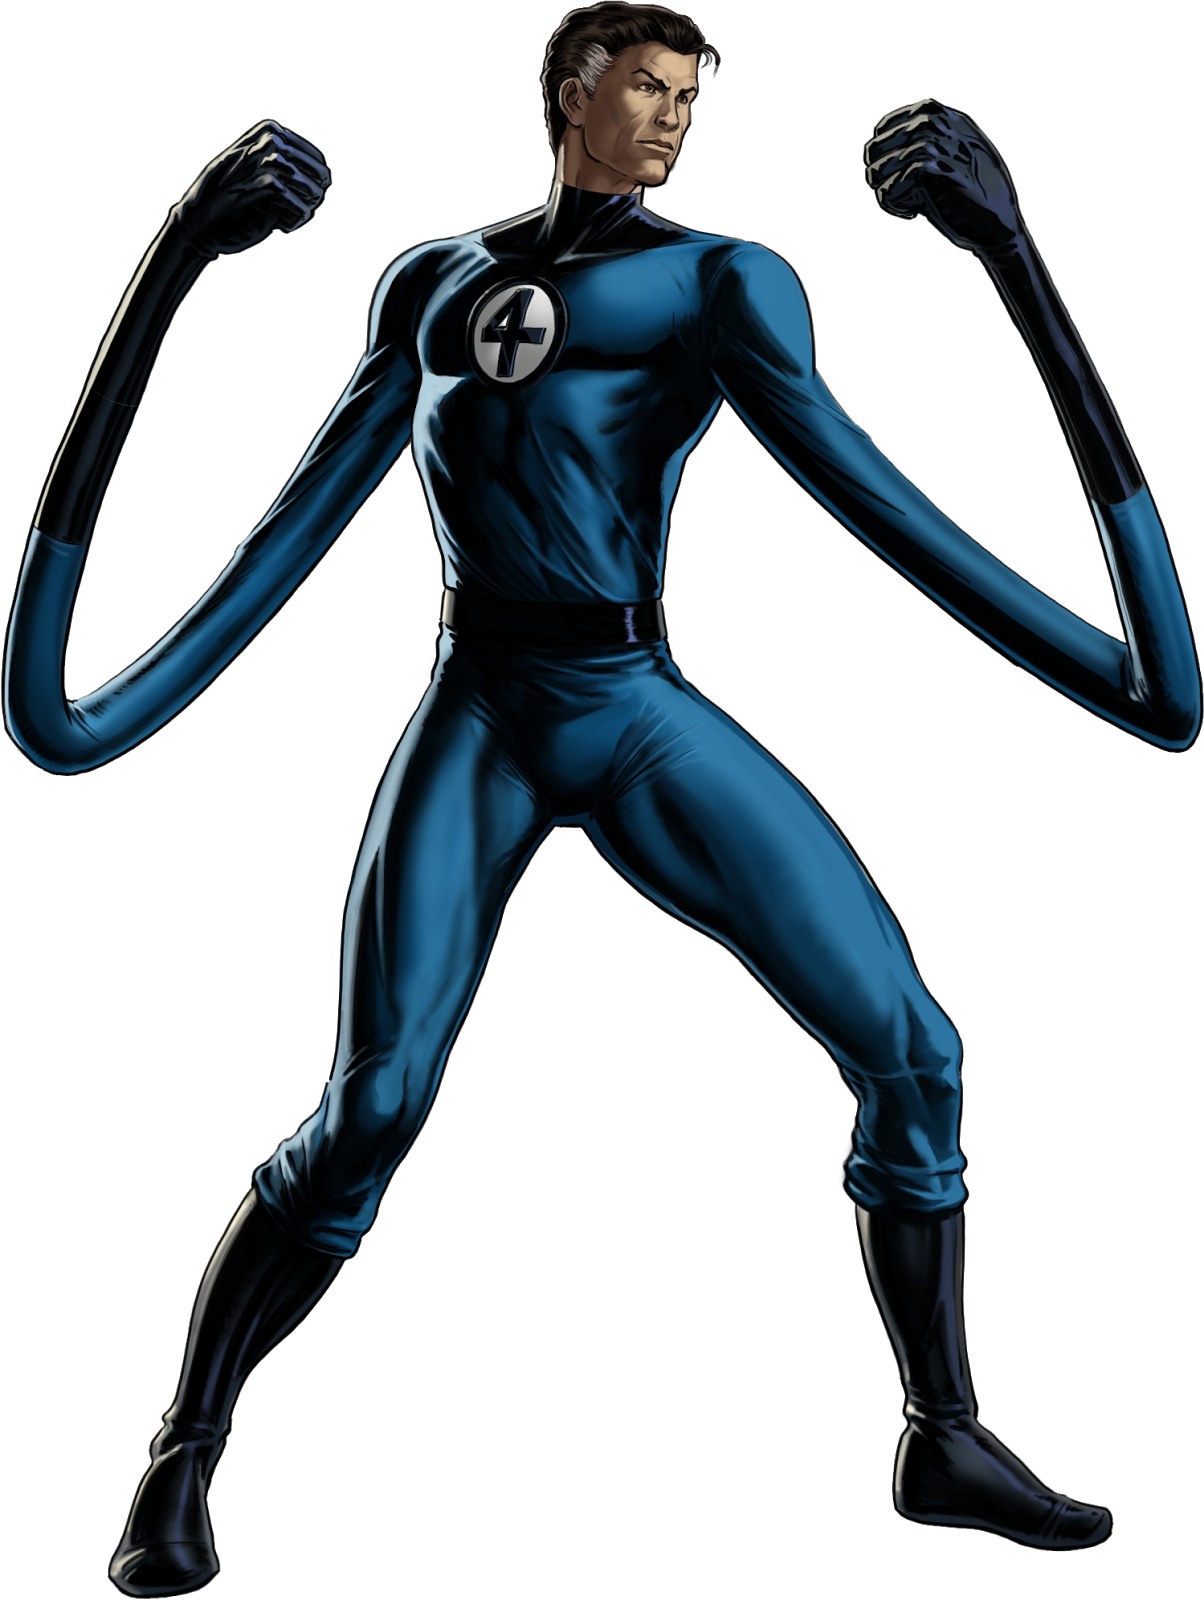 Reed_Richards_(Earth-TRN259)_001.png